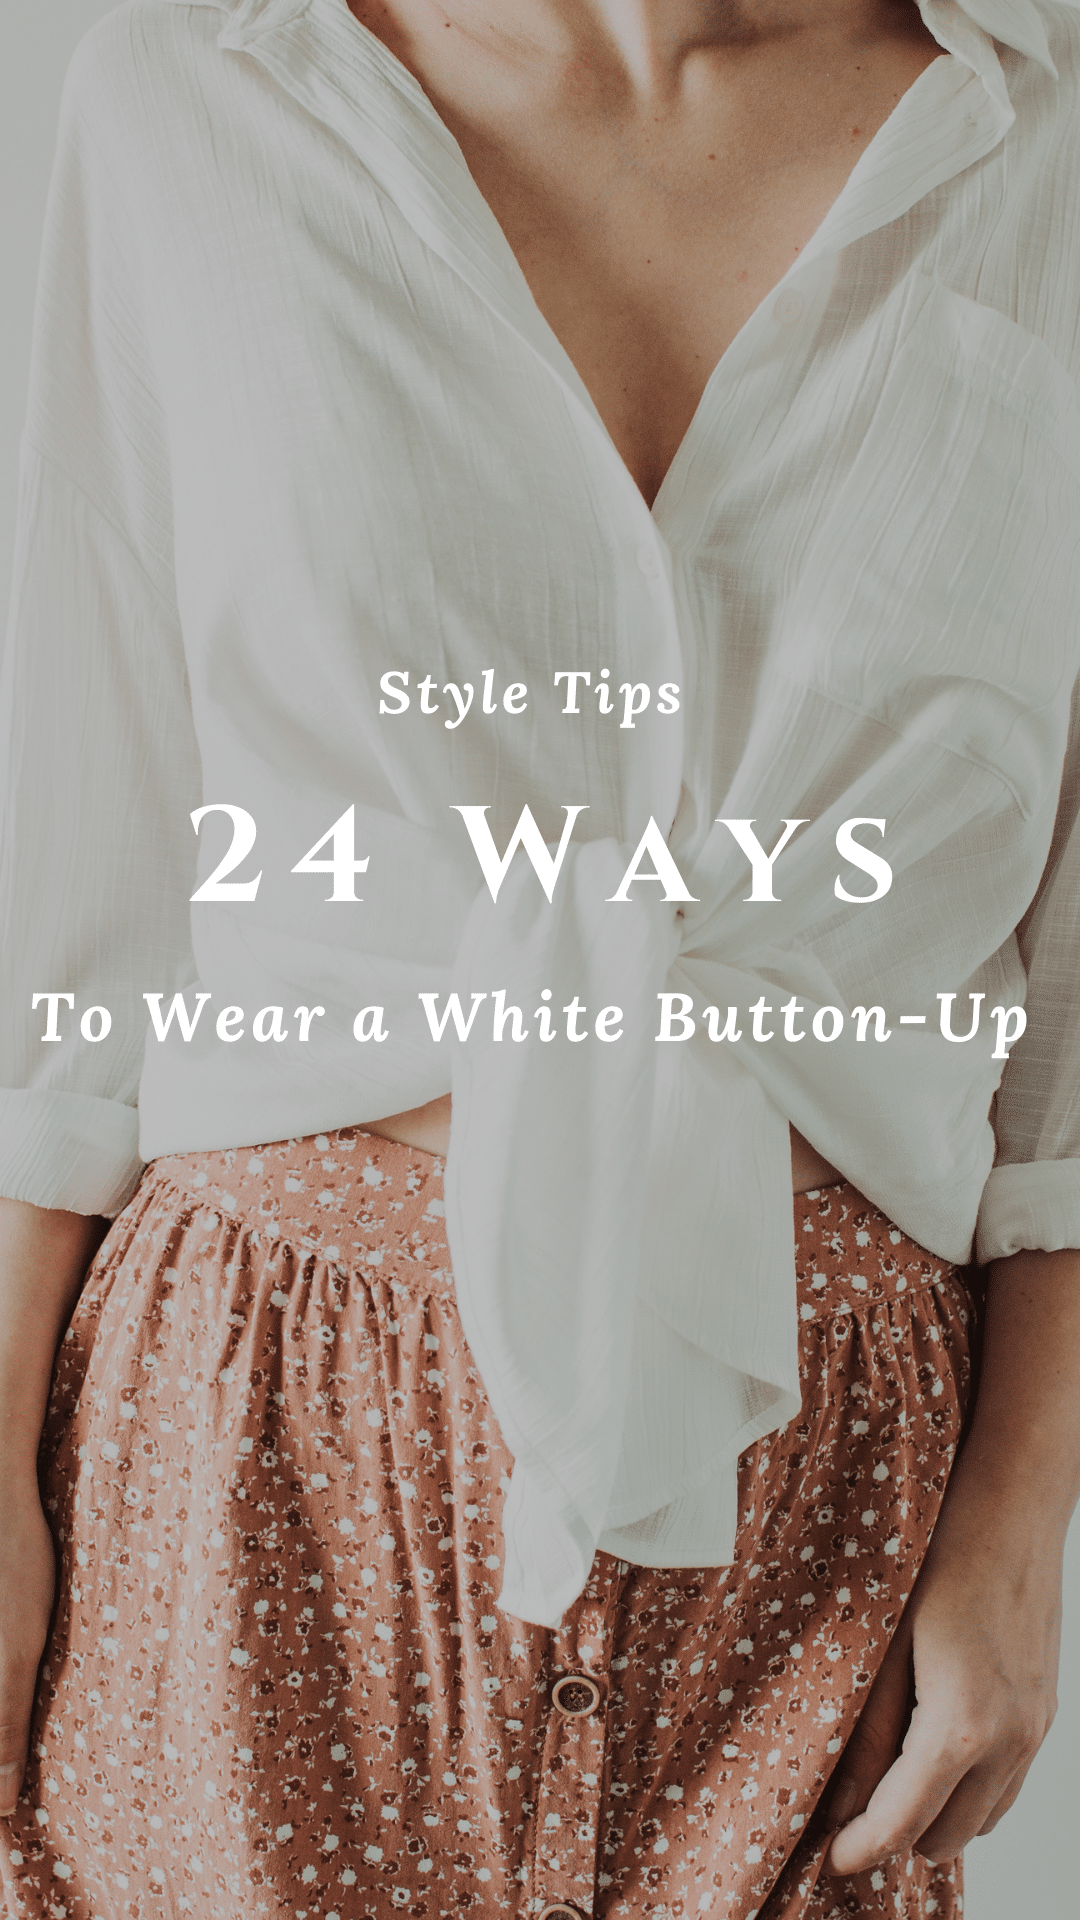 24 Ways to Wear a White Button-Up